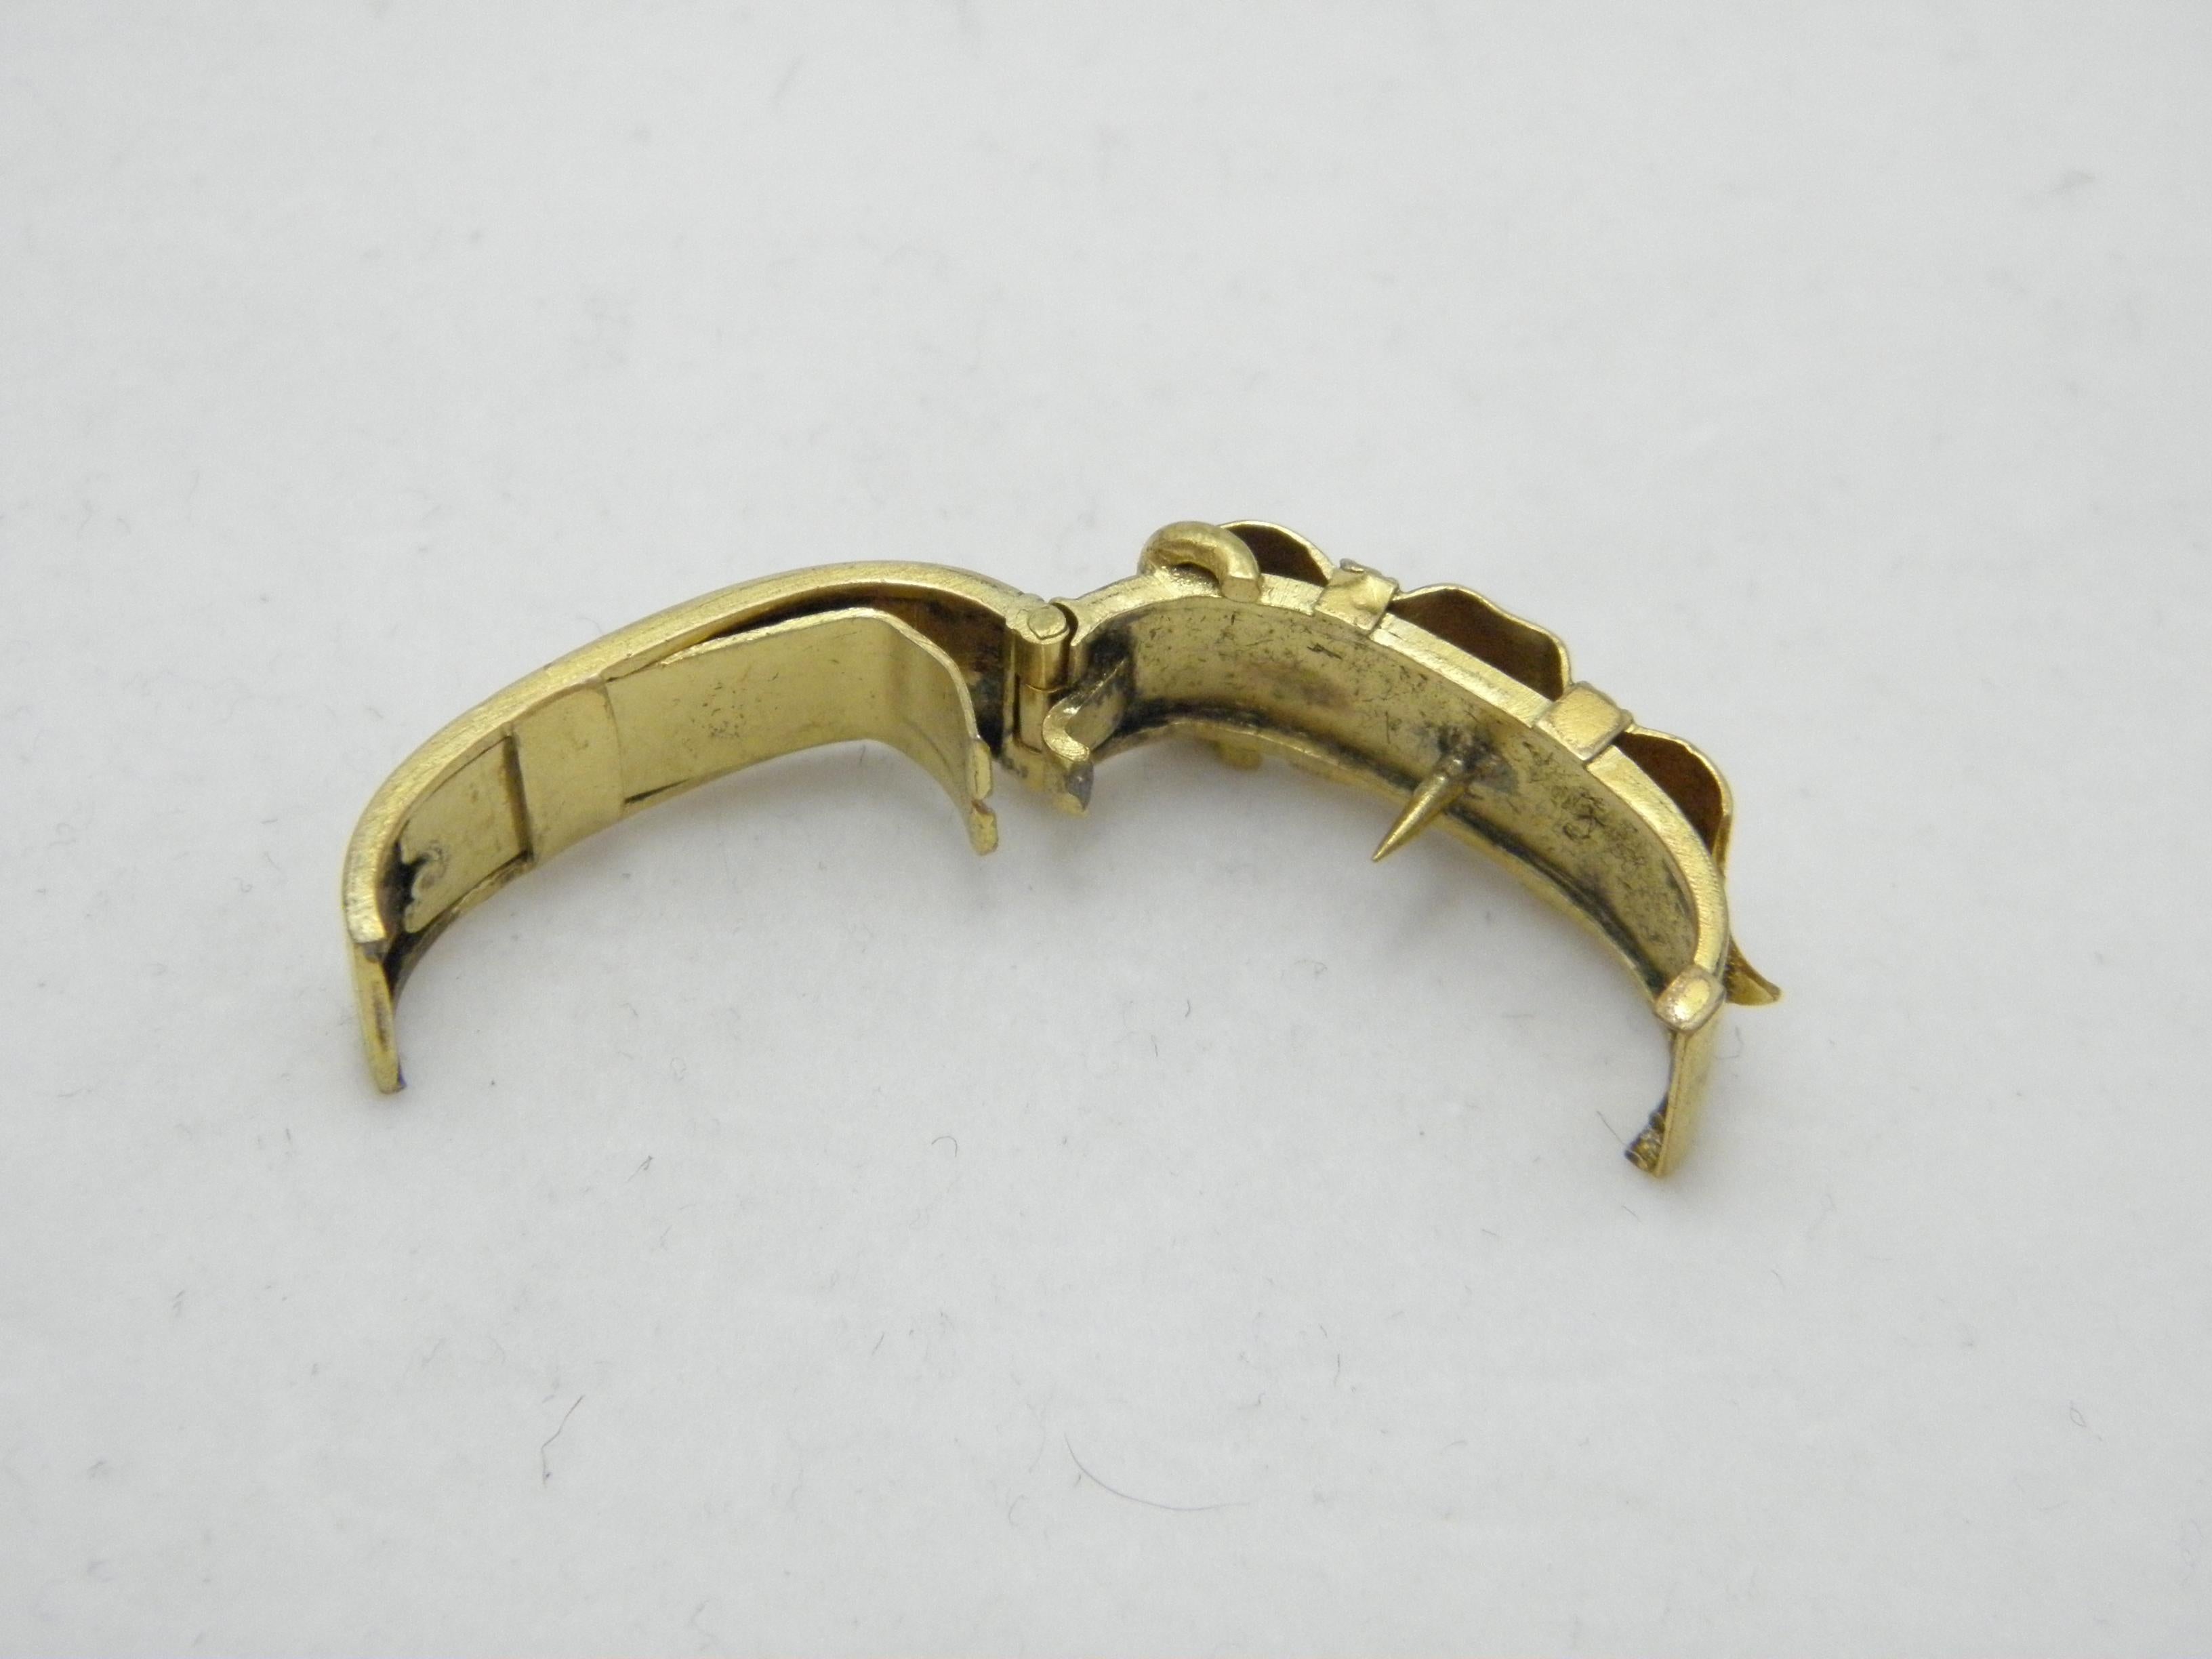 Bargain Antique 18ct Gold Buckle Scarf Clip Holder c1840 Heavy 750 Purity Heavy In Good Condition For Sale In Camelford, GB